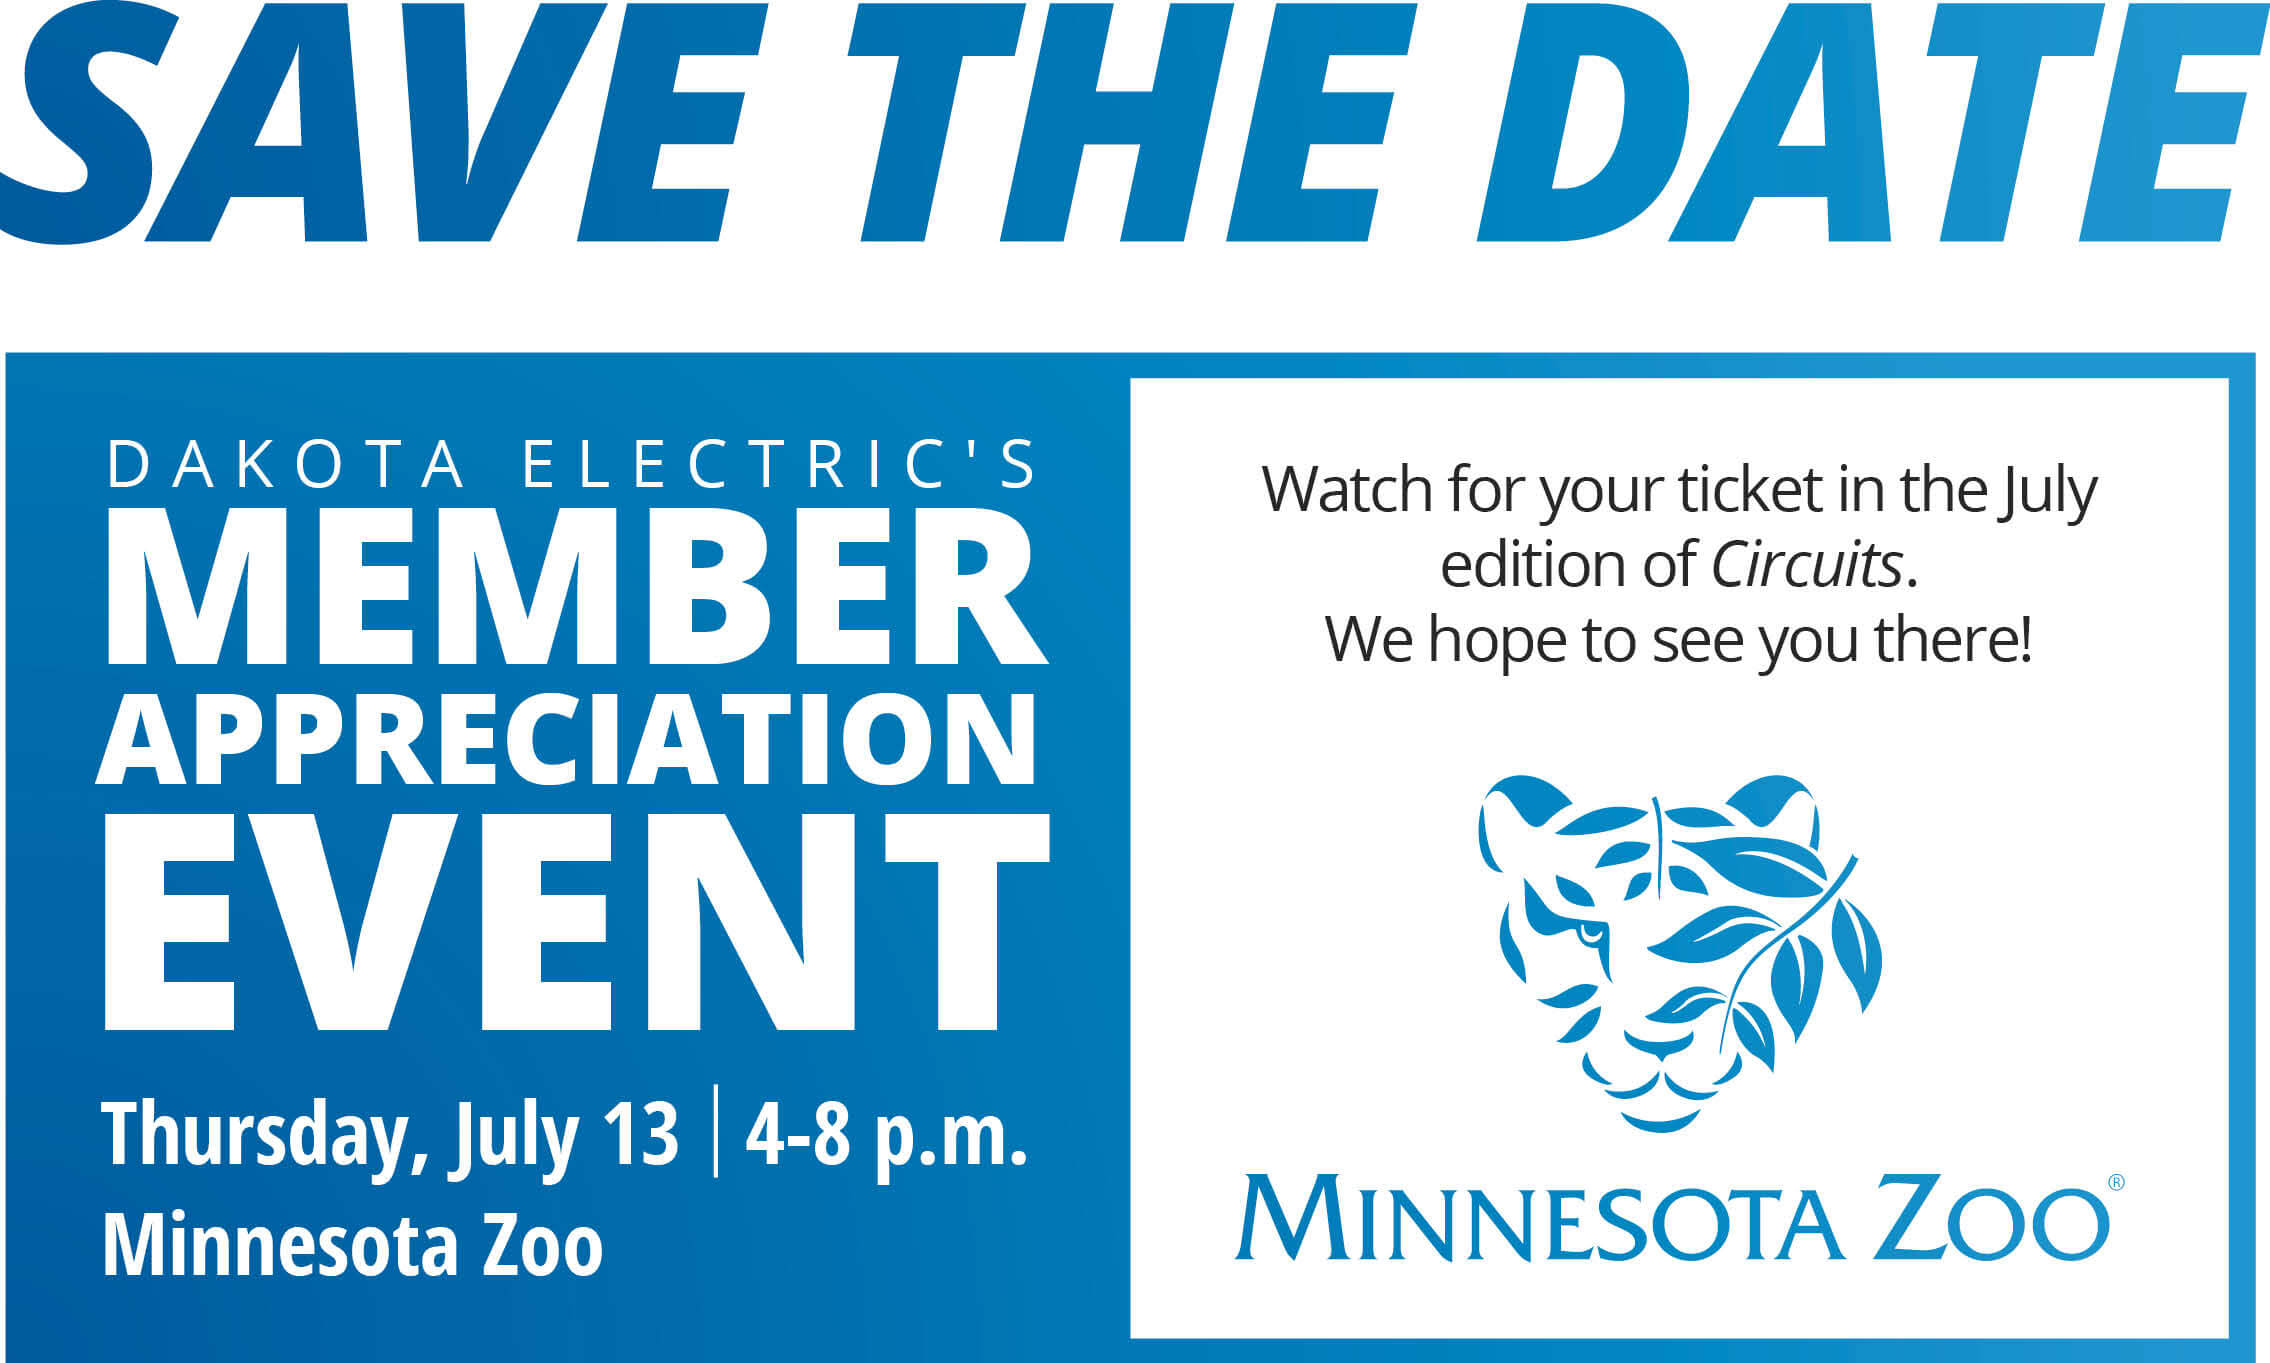 Reminder to save the date for Dakota Electric's Member Appreciation Event at the MN Zoo, Thursday, July 13 from 4-8 p.m.